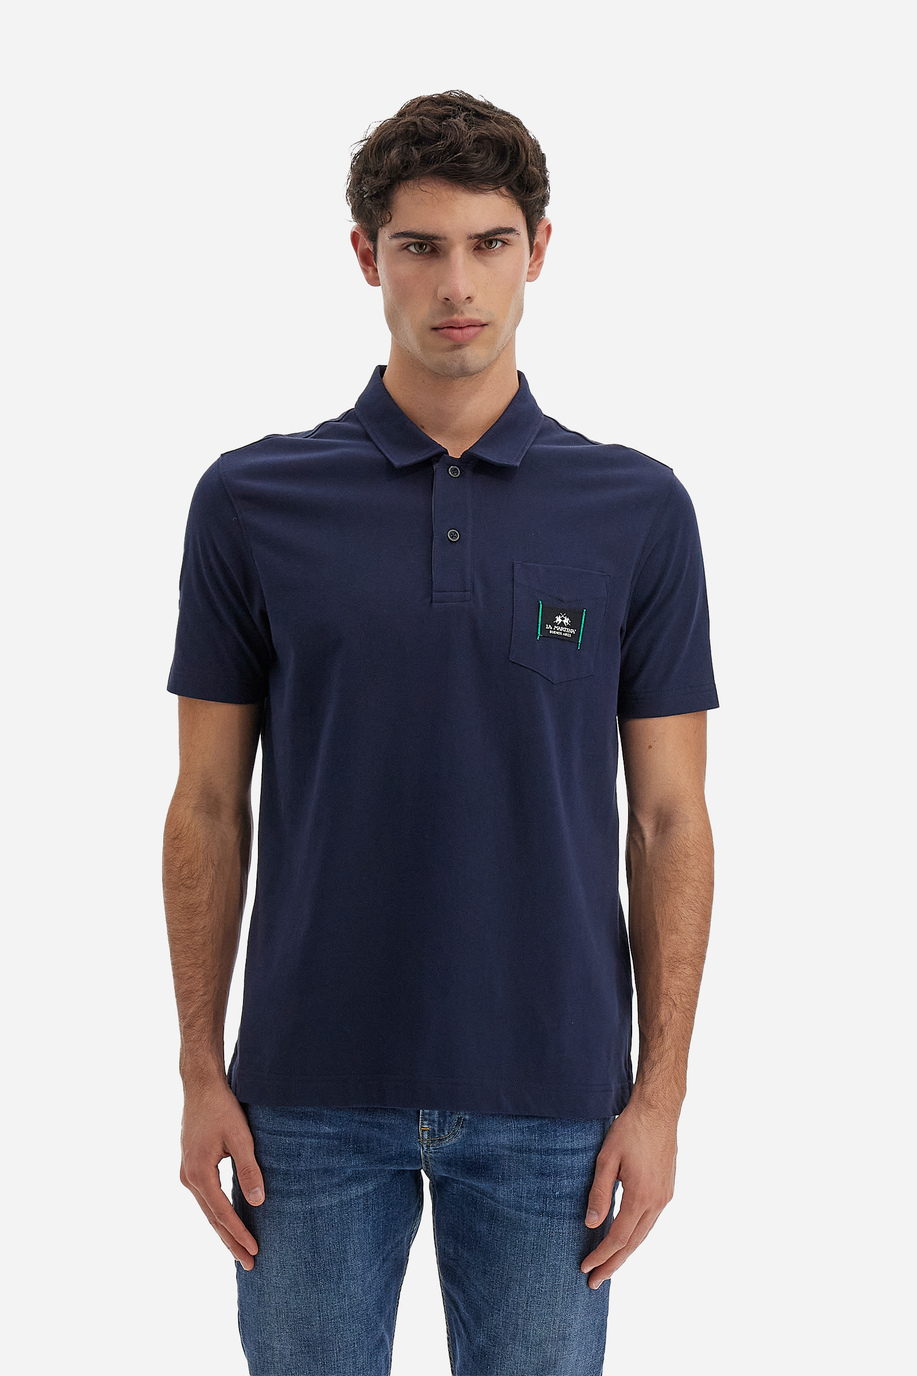 Men's short-sleeved polo shirt Logos with flat mini pocket in solid color - Vasant - Giftguide | La Martina - Official Online Shop